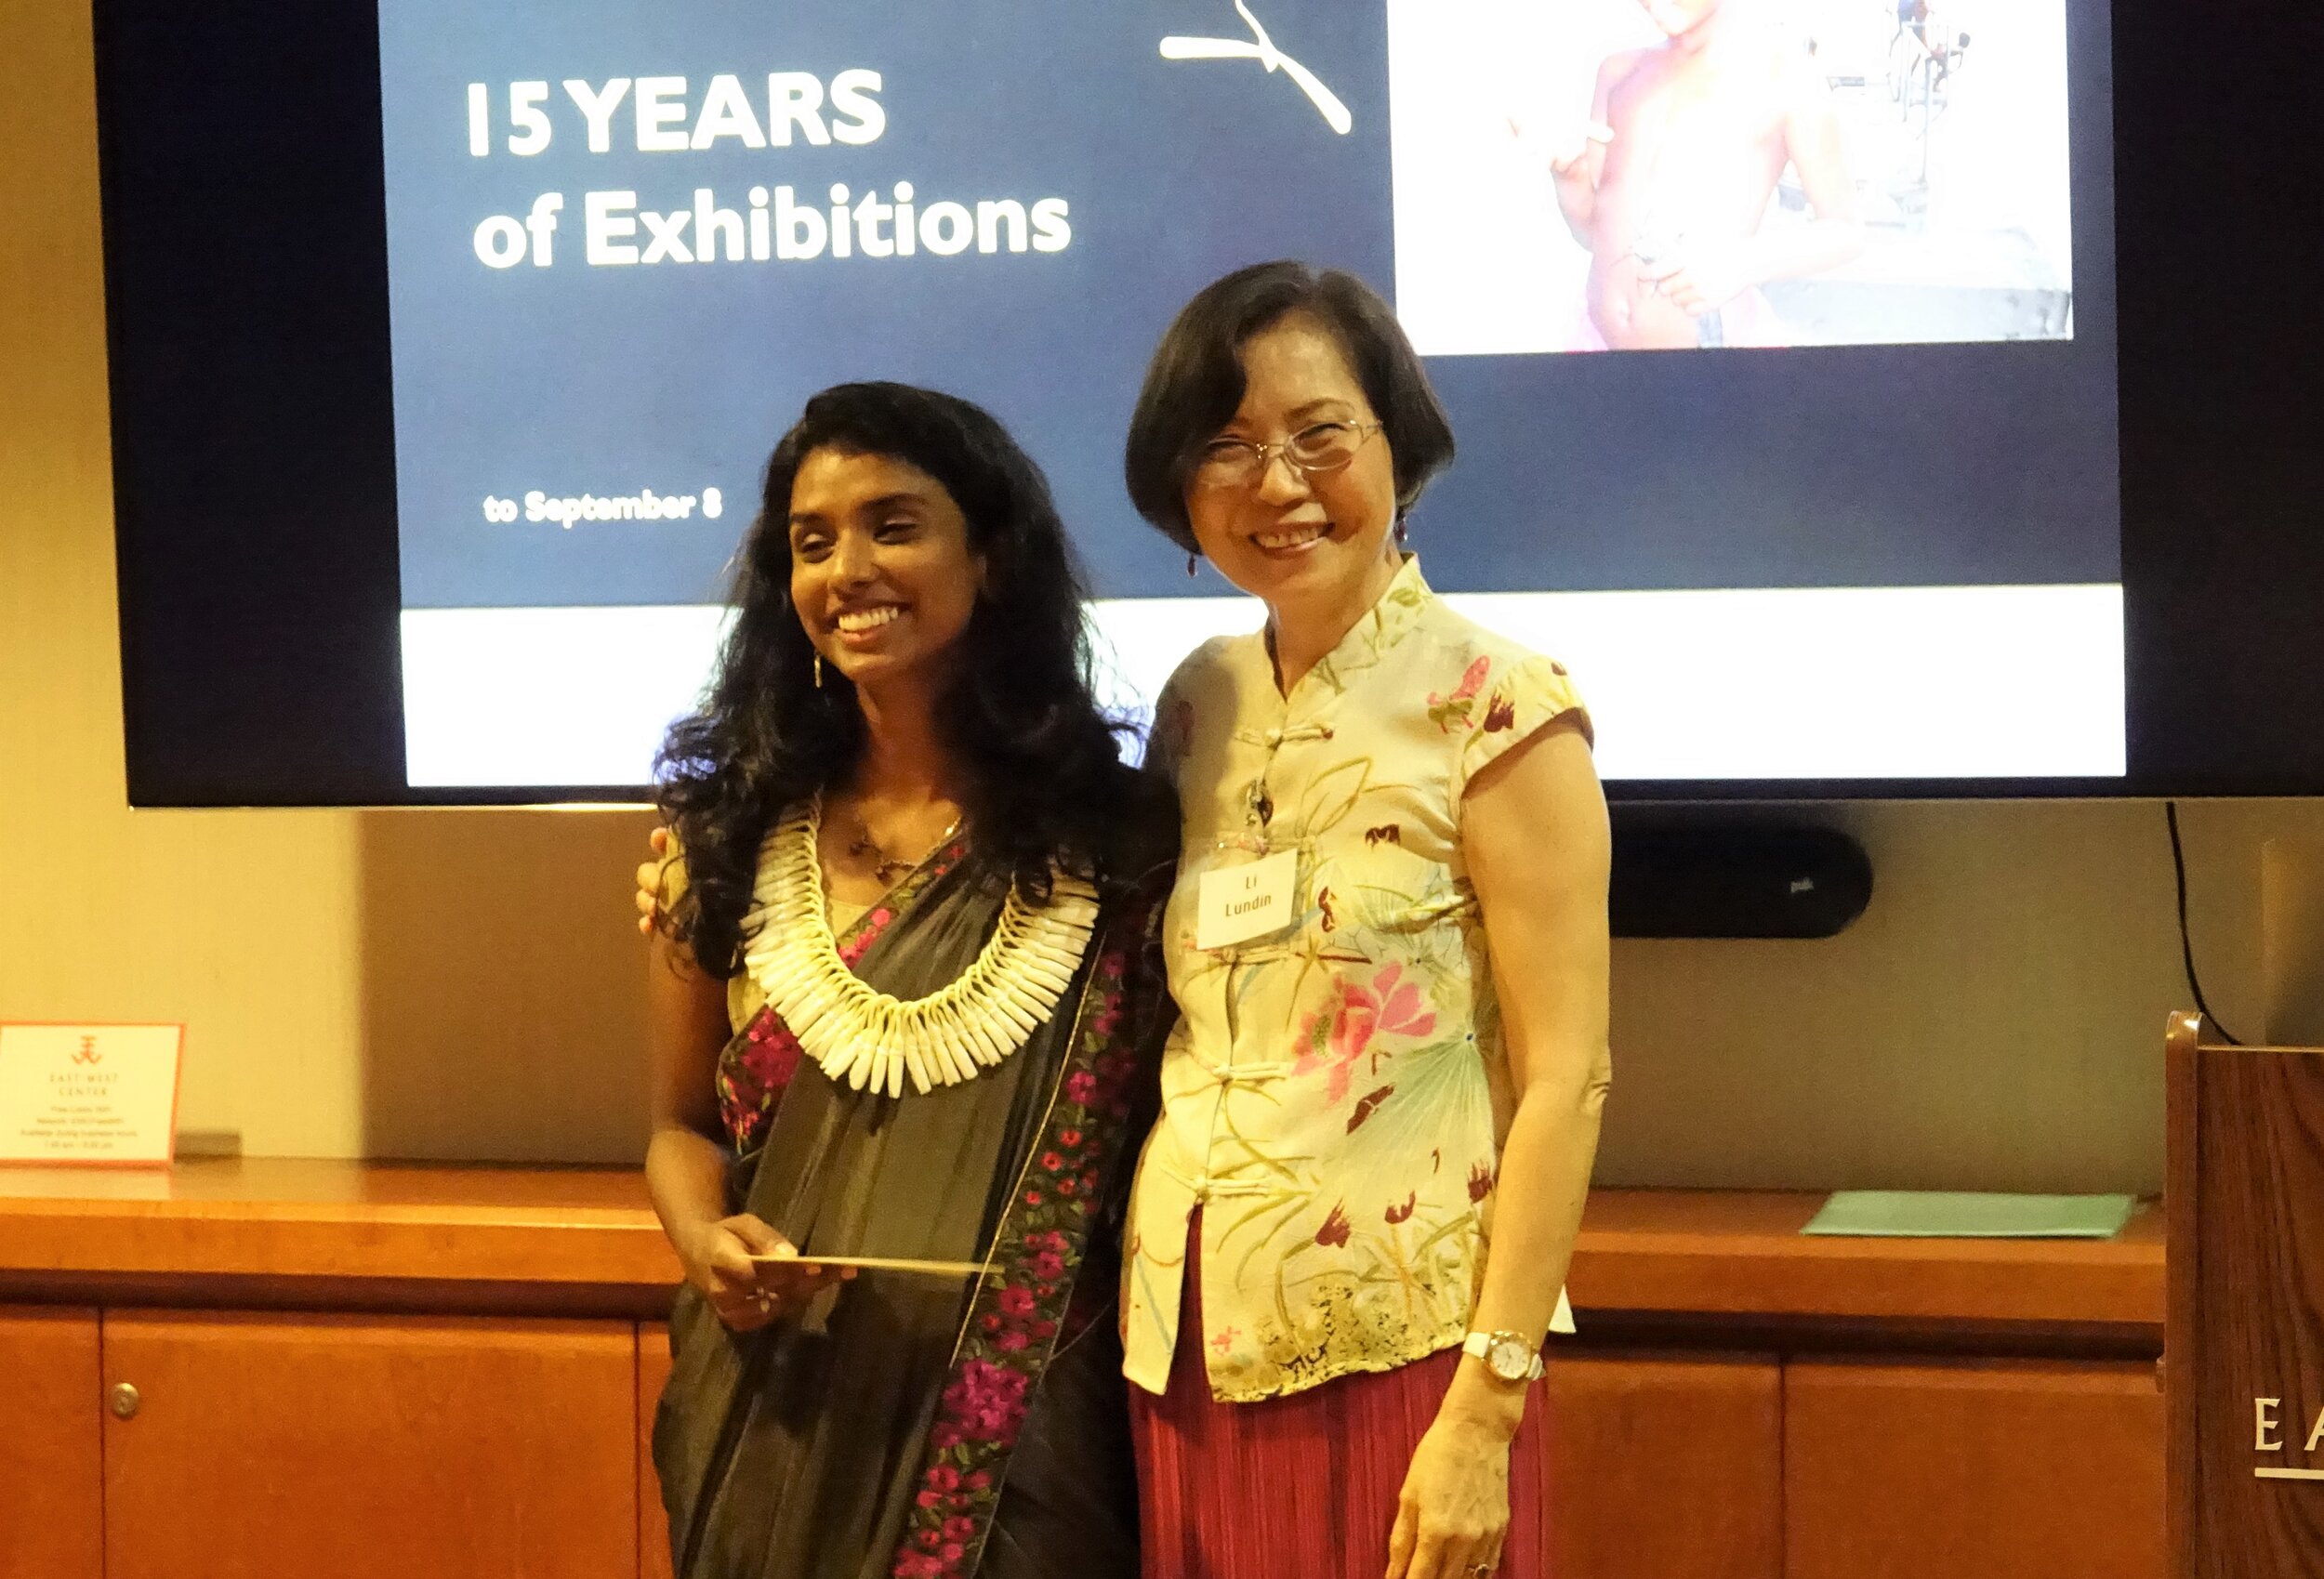  Miss Marina George received the Society's Rhoda E.A. Hackler Scholarship of $1,500 from President Li Lundin for the 2019-2020 academic year. Marina is from India where she worked as a disability rights advocate and researcher, studying the effects o